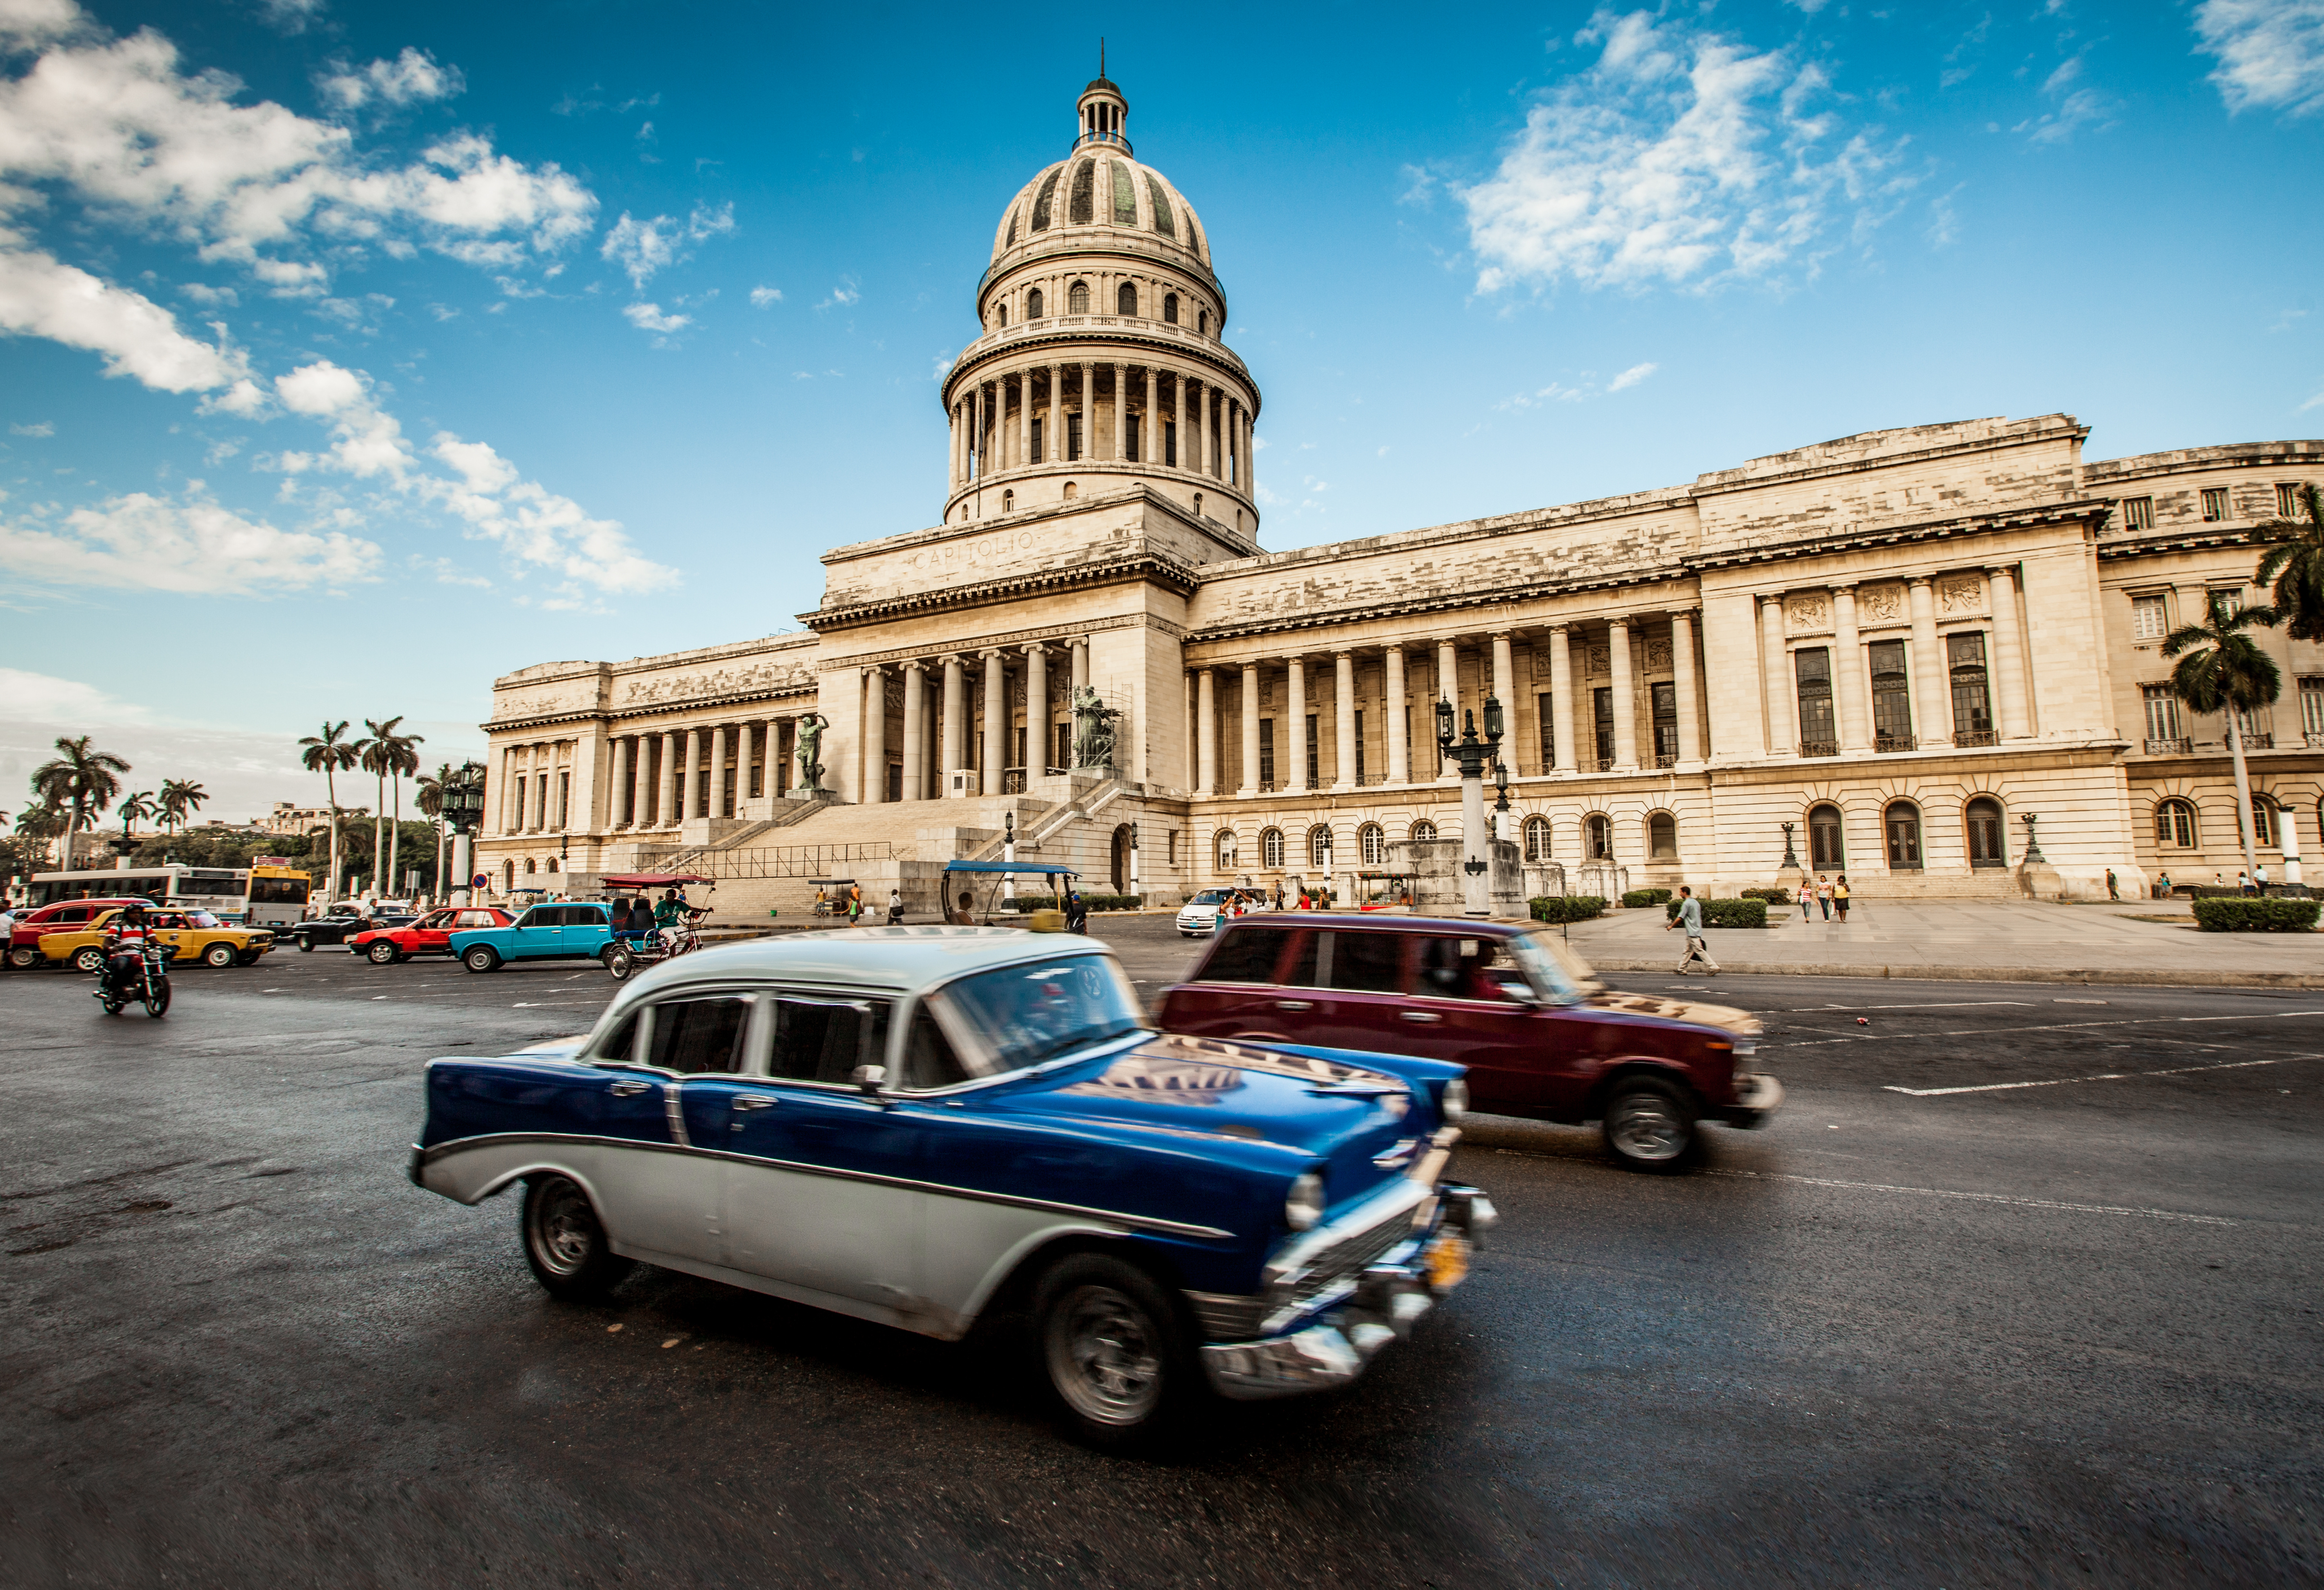 Travel to Cuba with Road Scholar